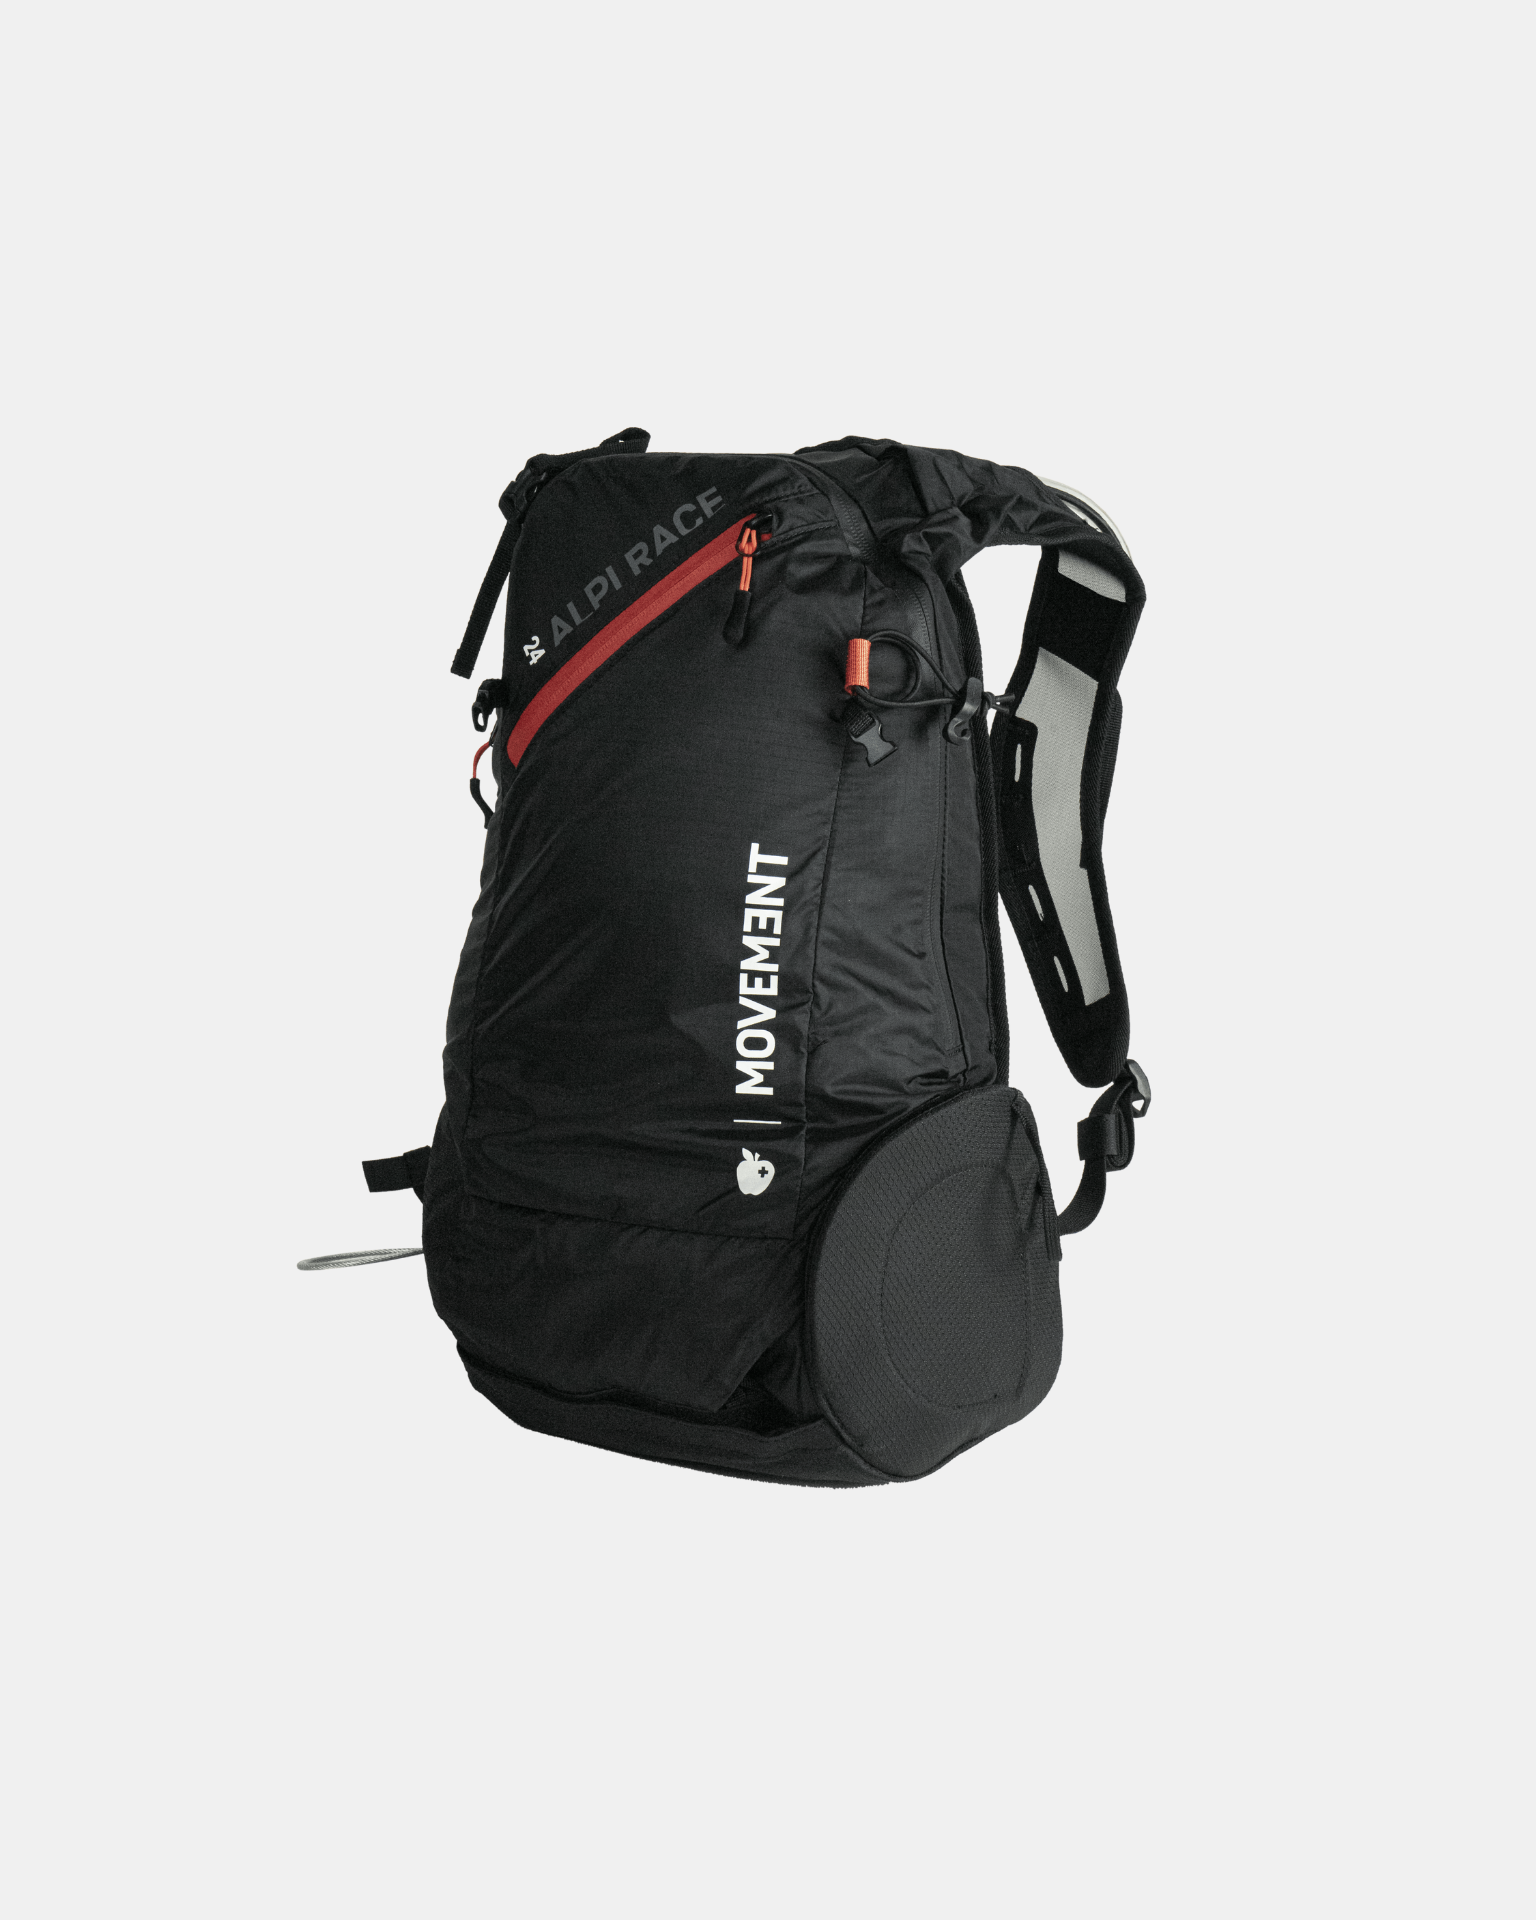 Optimize your speed touring experience with Movement's Alpi Race backpack.